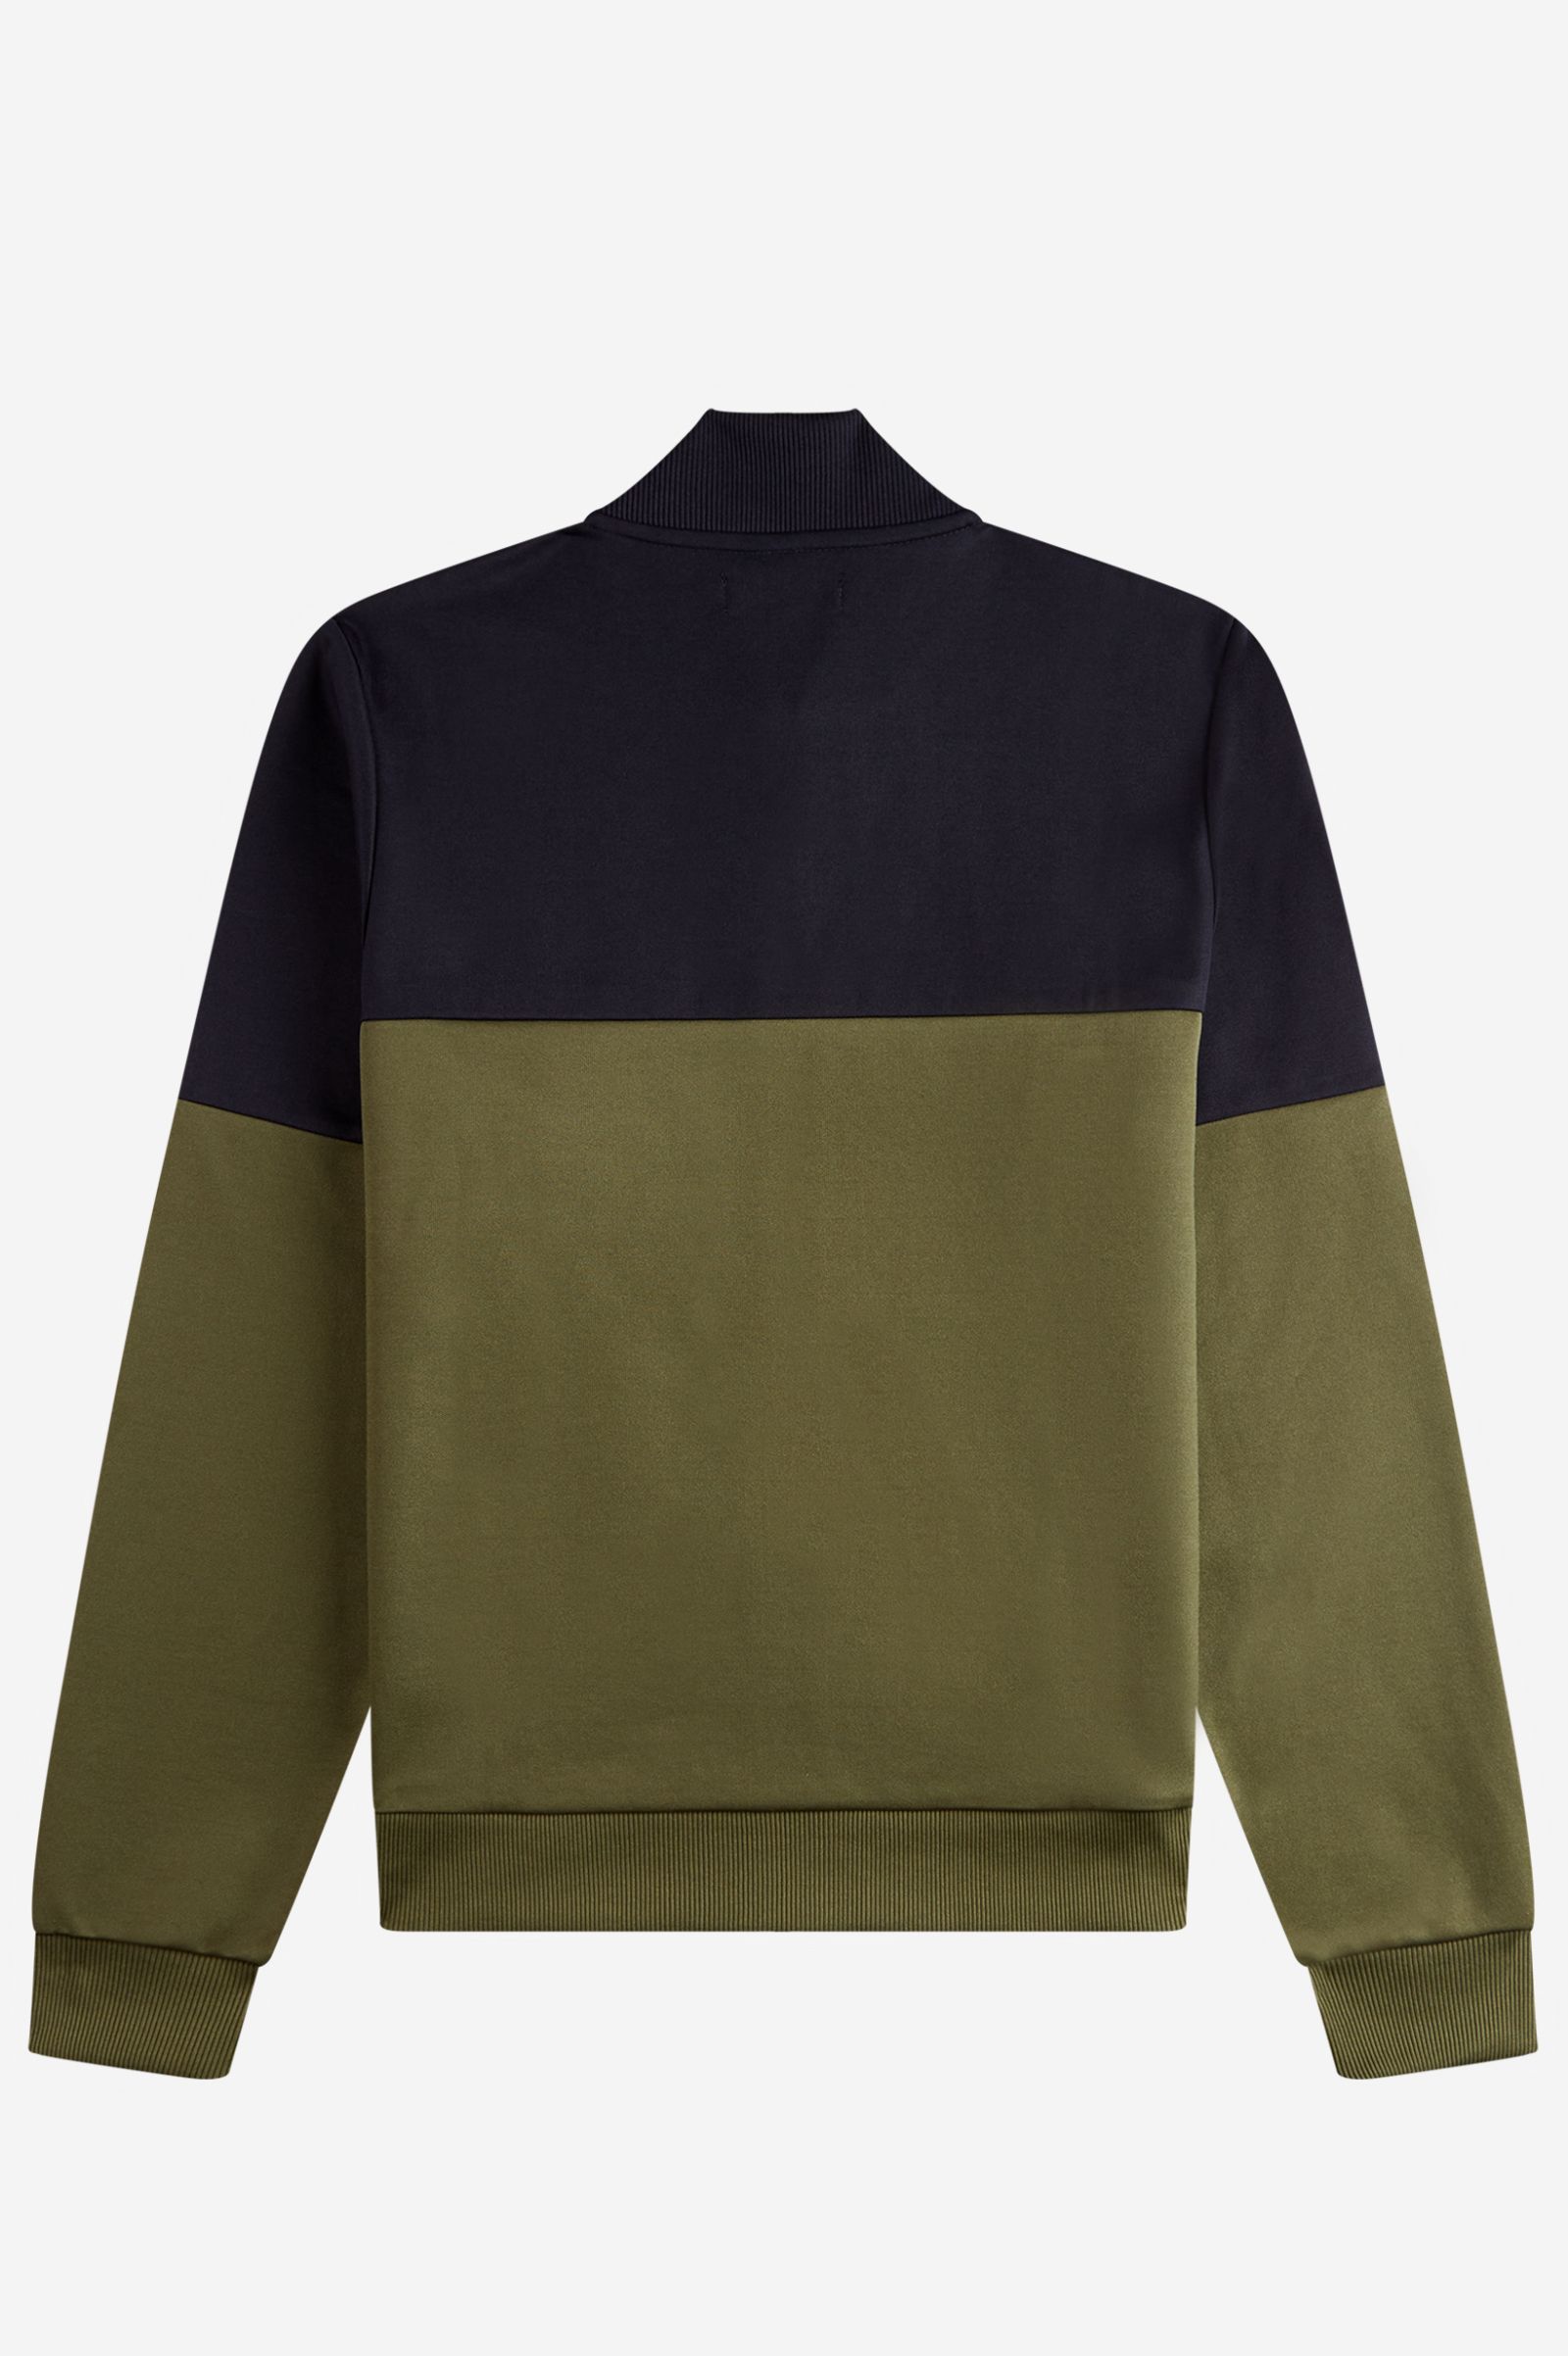 Fred Perry Colour Block Track Jacket in Military Green